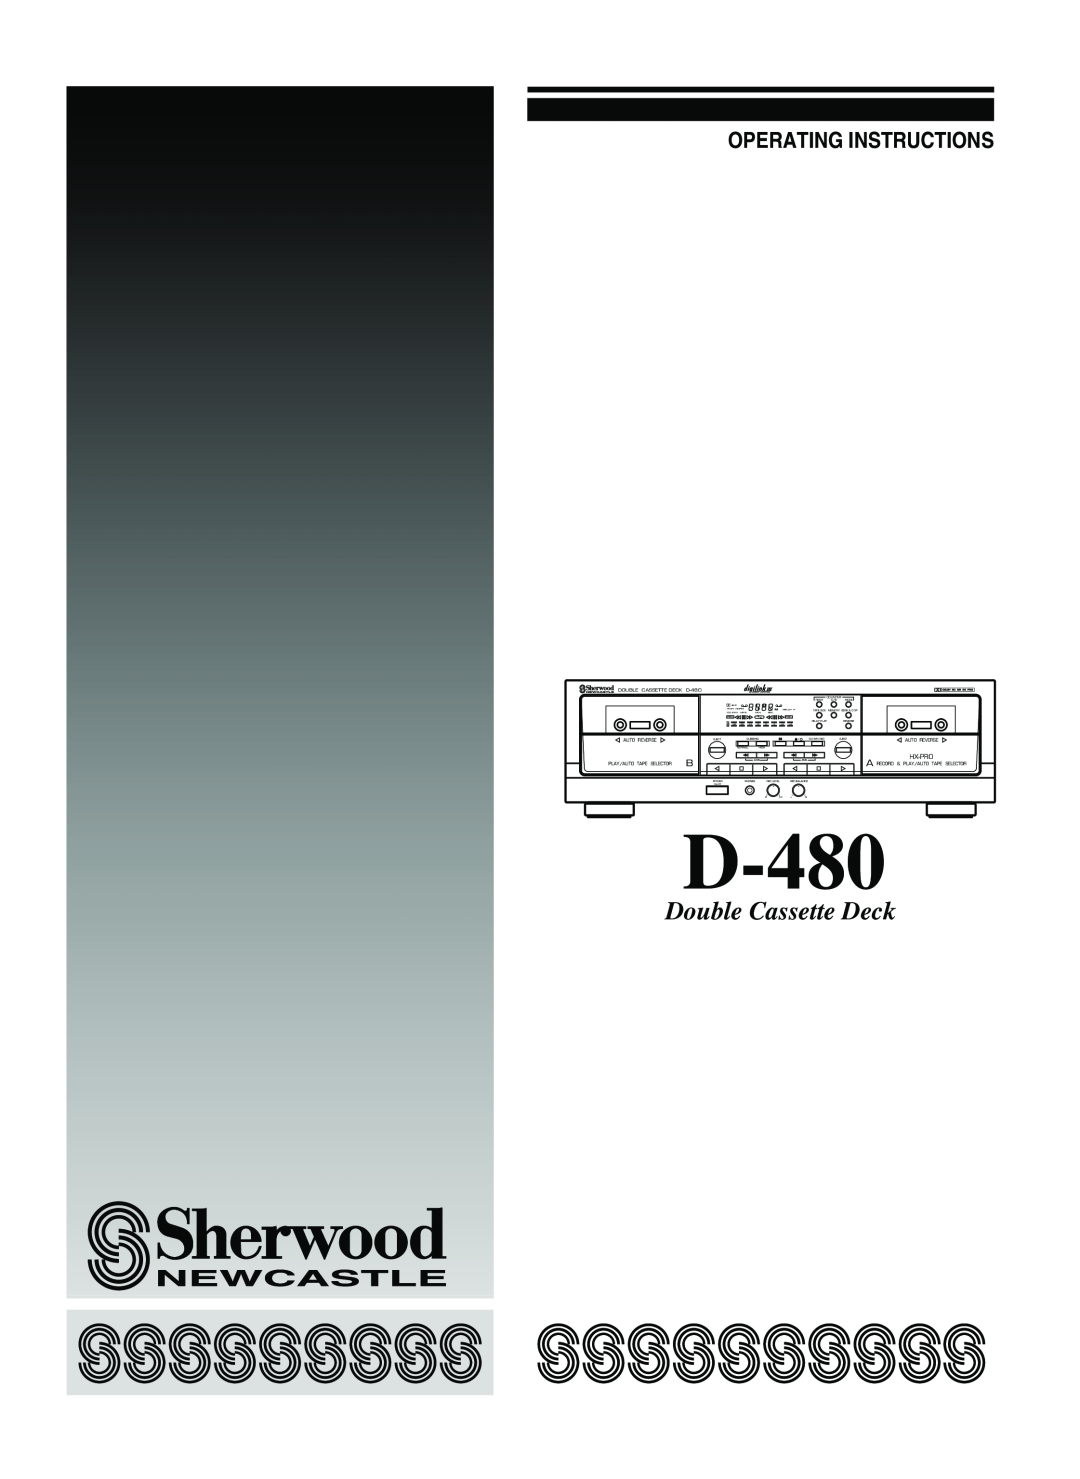 Sherwood D-480 operating instructions Operating Instructions, Double Cassette Deck, Hx-Pro 